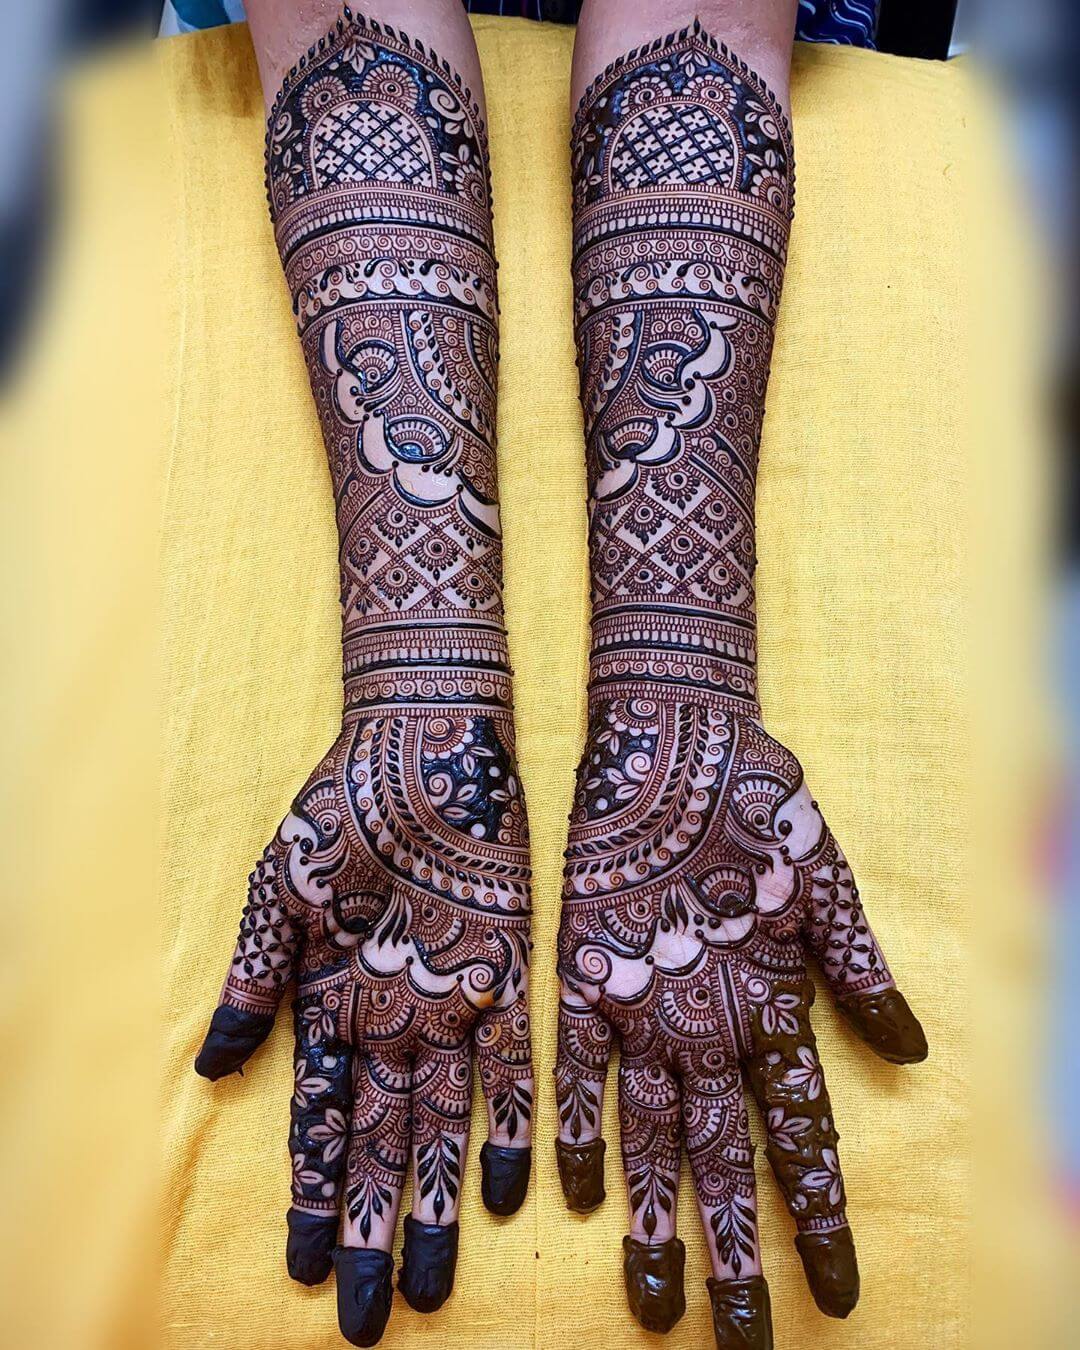 Decorative mehndi patterns for the bride to adorn her hands with.